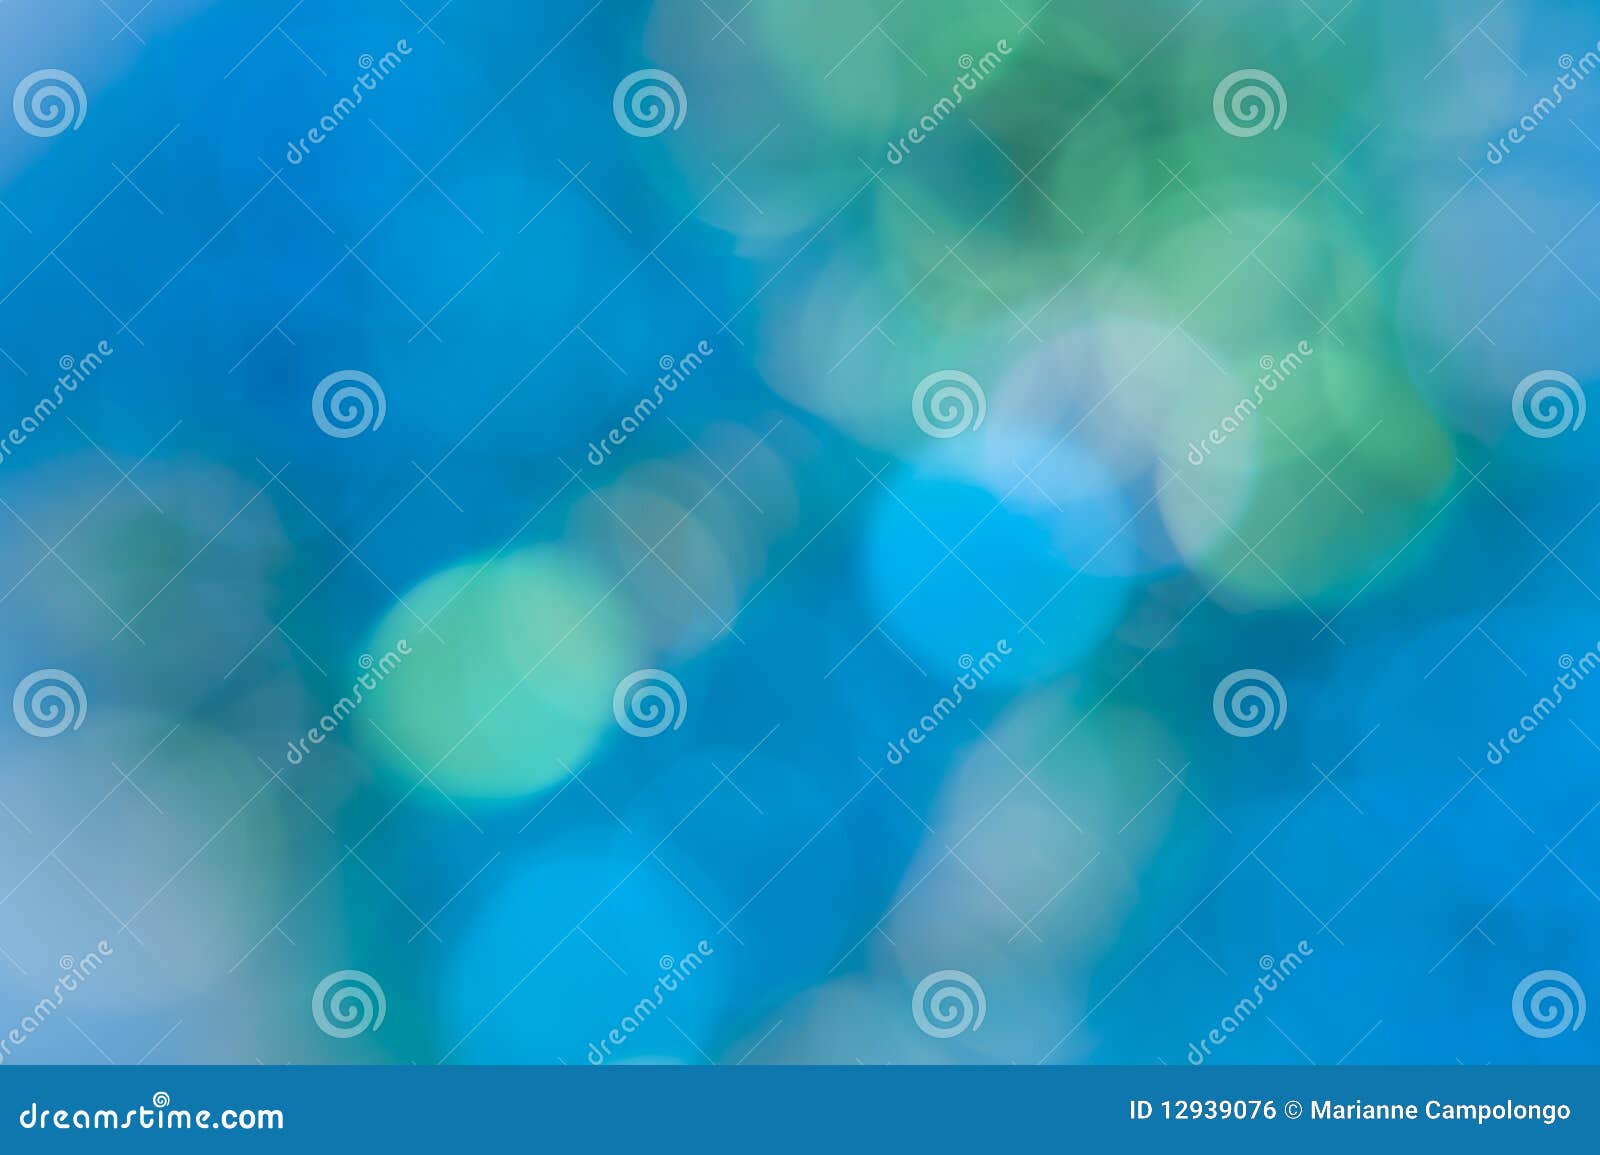 blue green and aqua turquoise abstract background